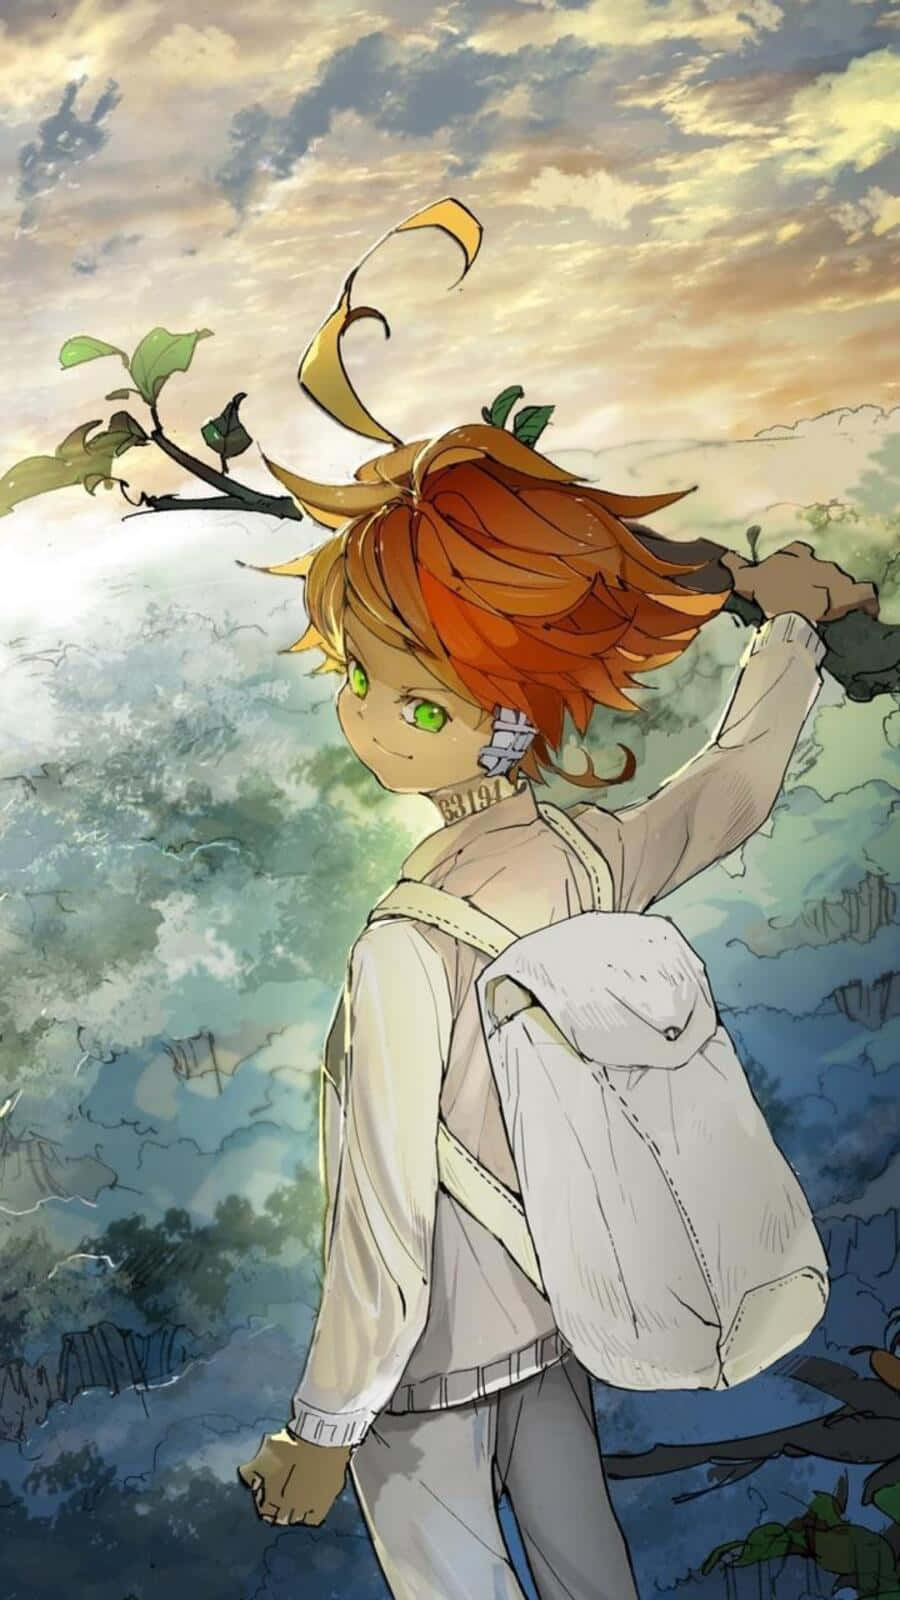 The Promised Neverland's Emma standing courageously in a mysterious forest Wallpaper